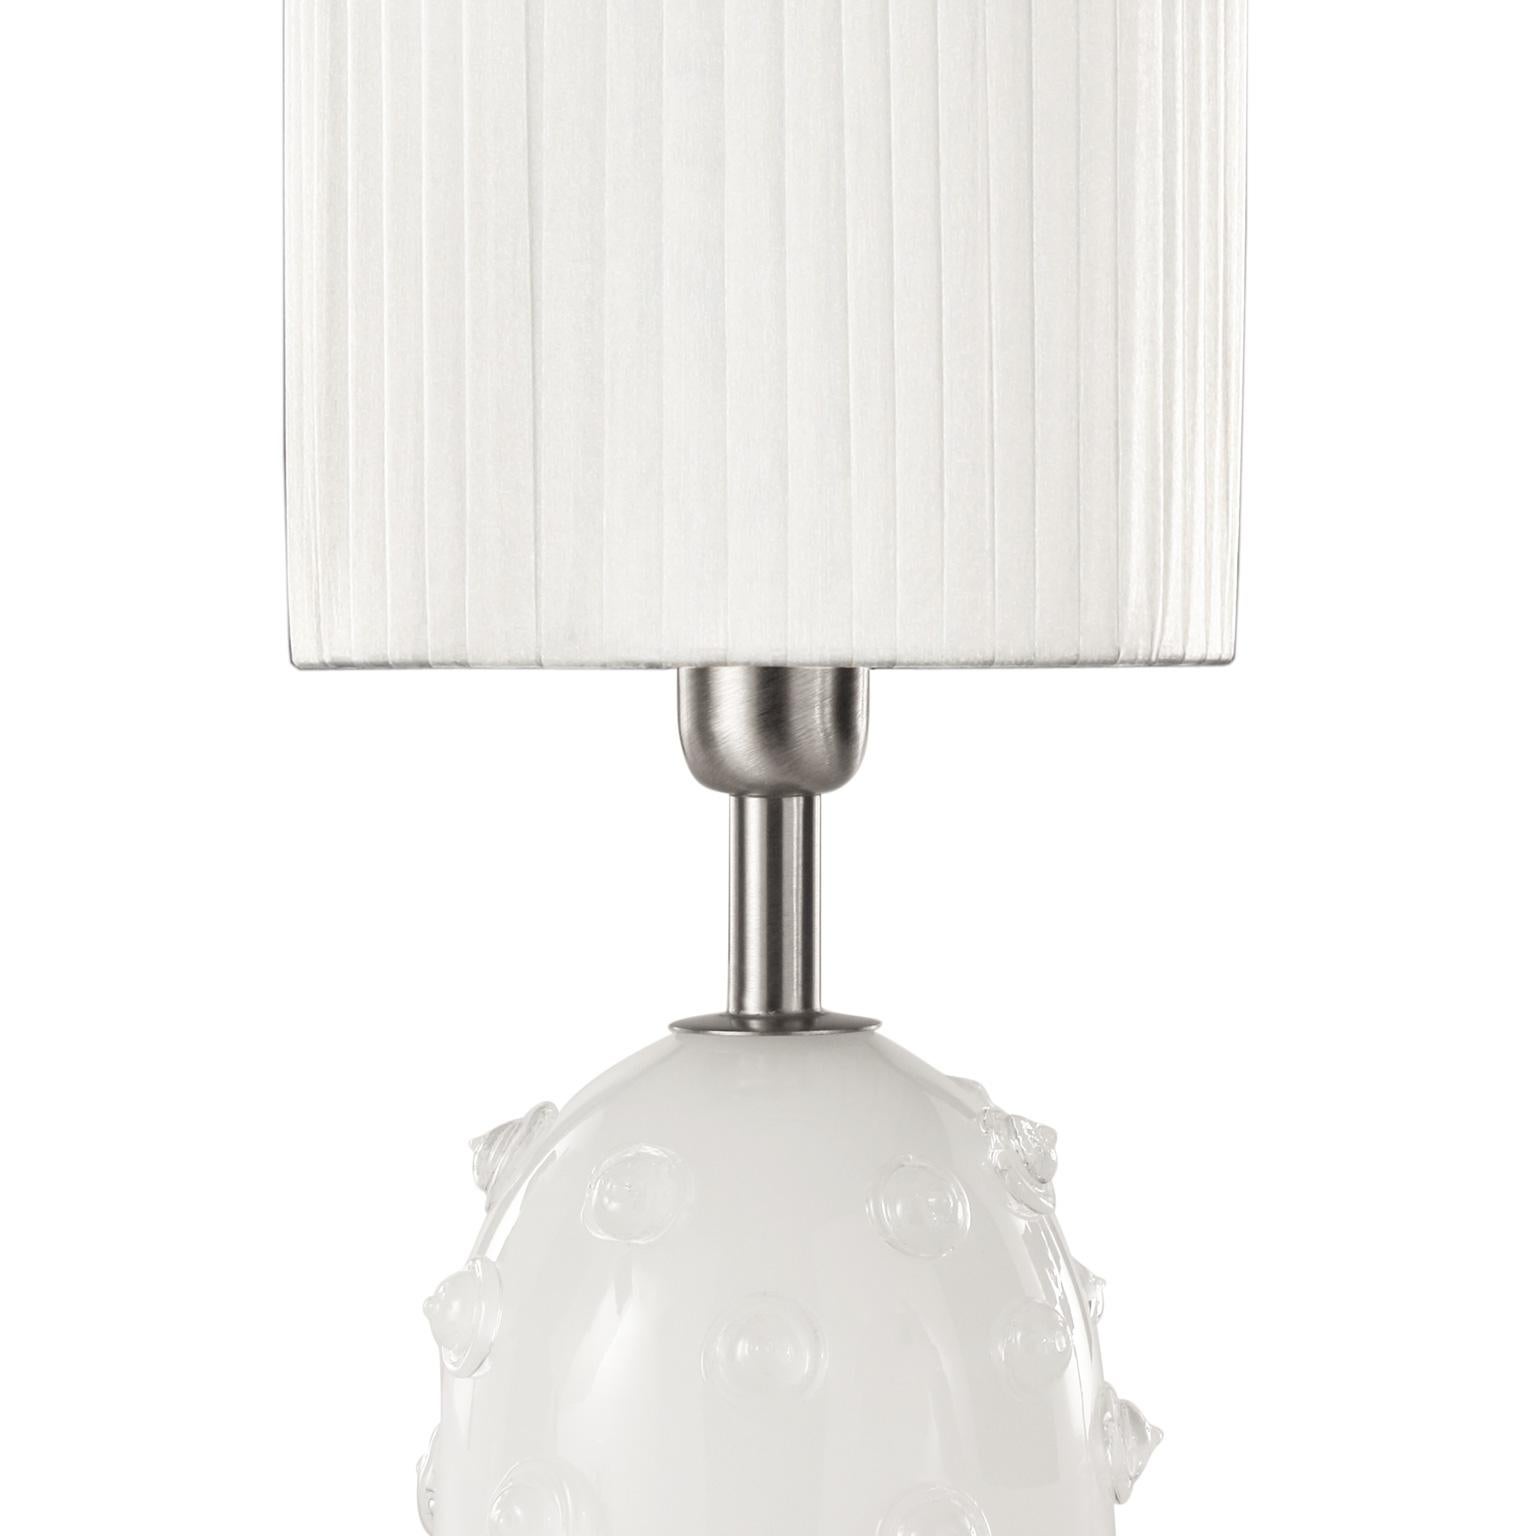 Table lamp in silk artistic Murano glass with clear “borchie” (particular application in glass on the base), grey organza lampshade. Nickel fixture.
The handcrafted soul of our lighting products is reinvented every time we start a new project, when